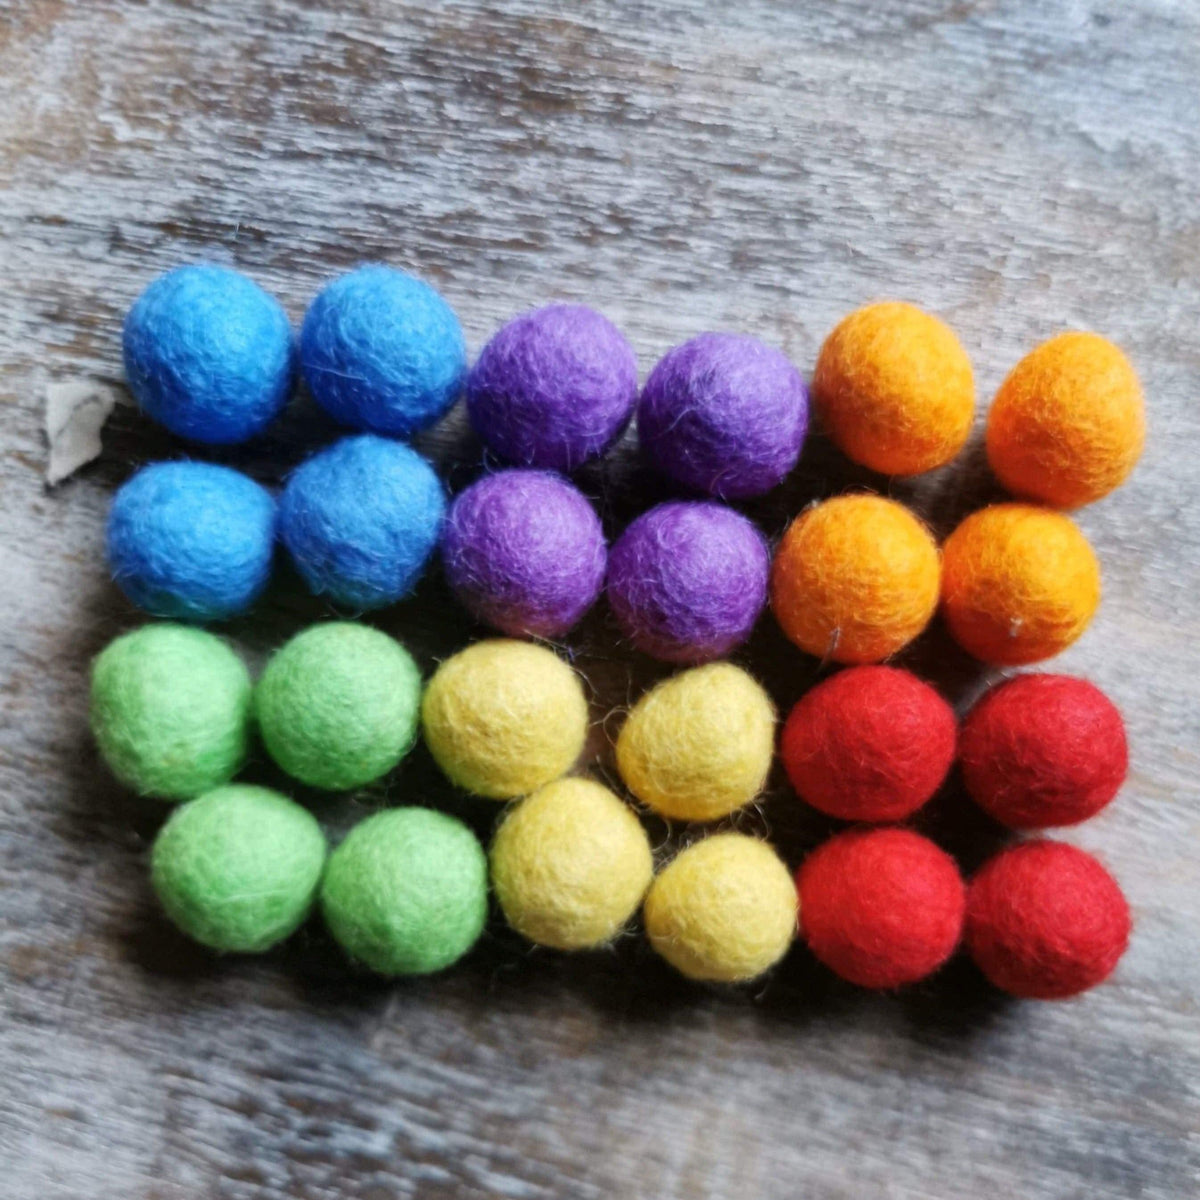 The Curated Parcel - 100% Pure Wool Felt Balls 